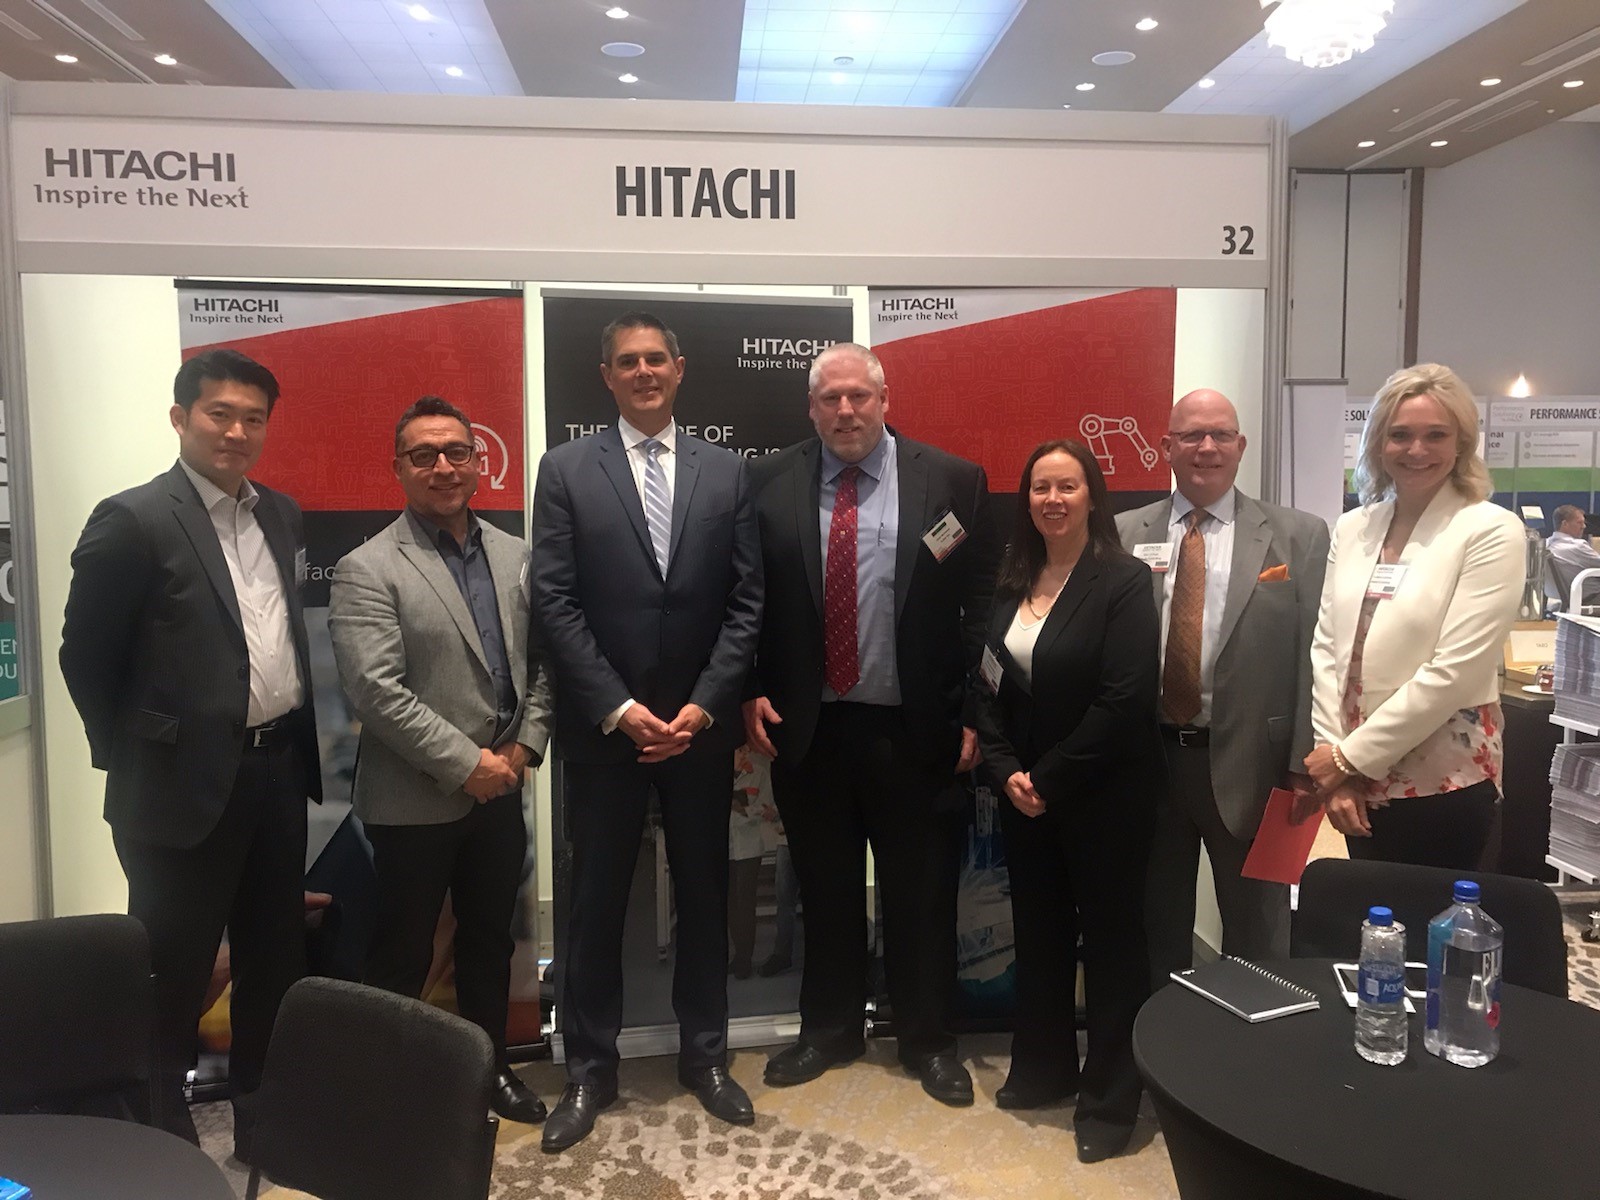 Hitachi platinum sponsor for the North American Manufacturing Excellence Summit 2019